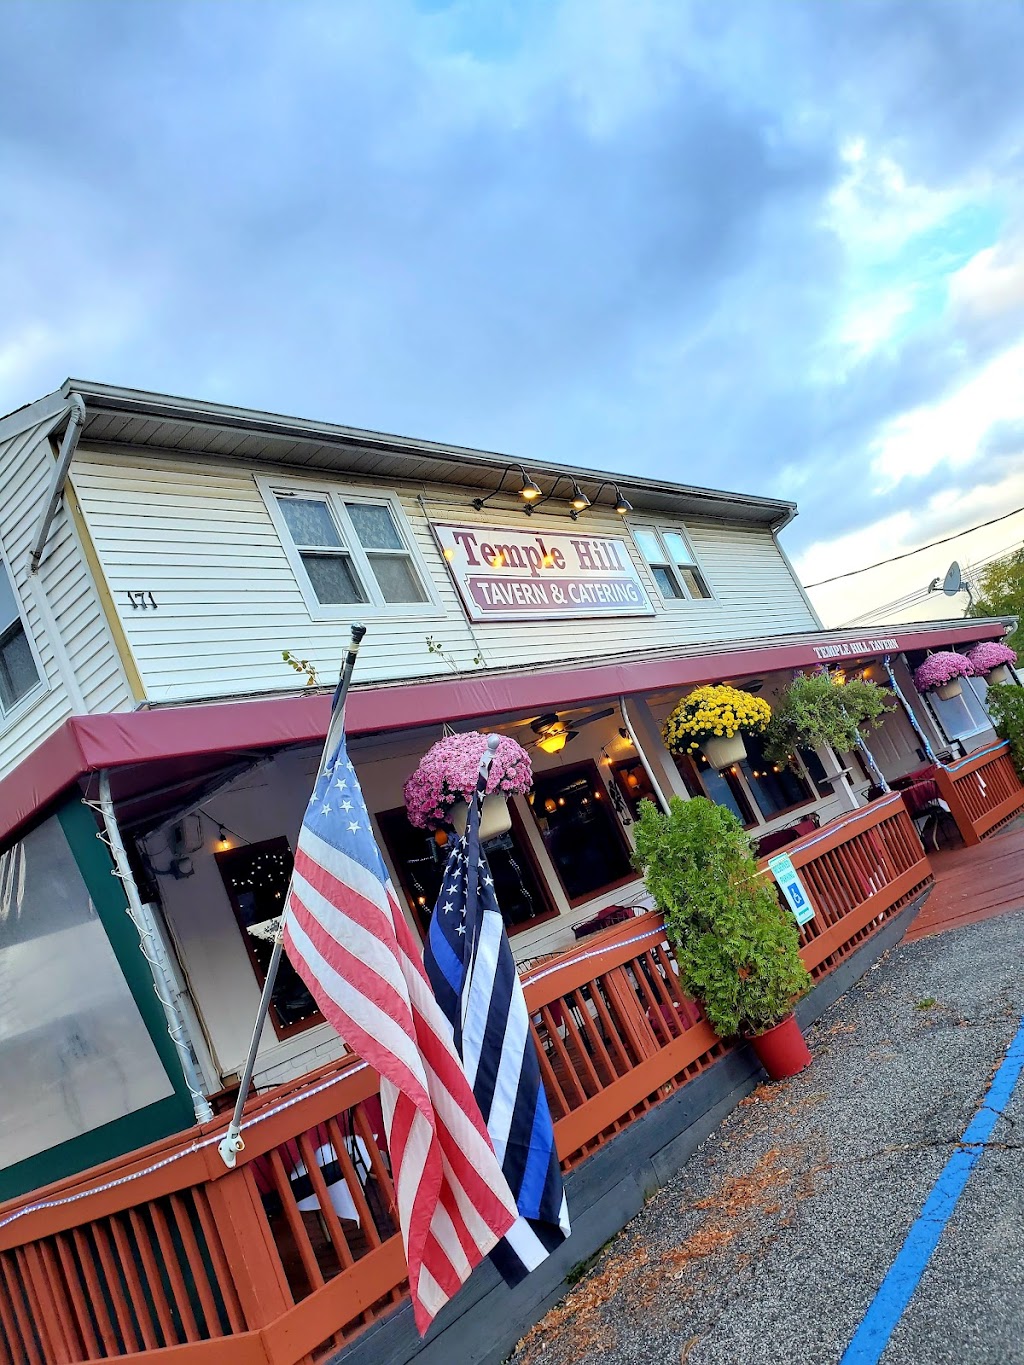 Temple Hill Tavern | 171 Temple Hill Rd, New Windsor, NY 12553 | Phone: (845) 563-9044